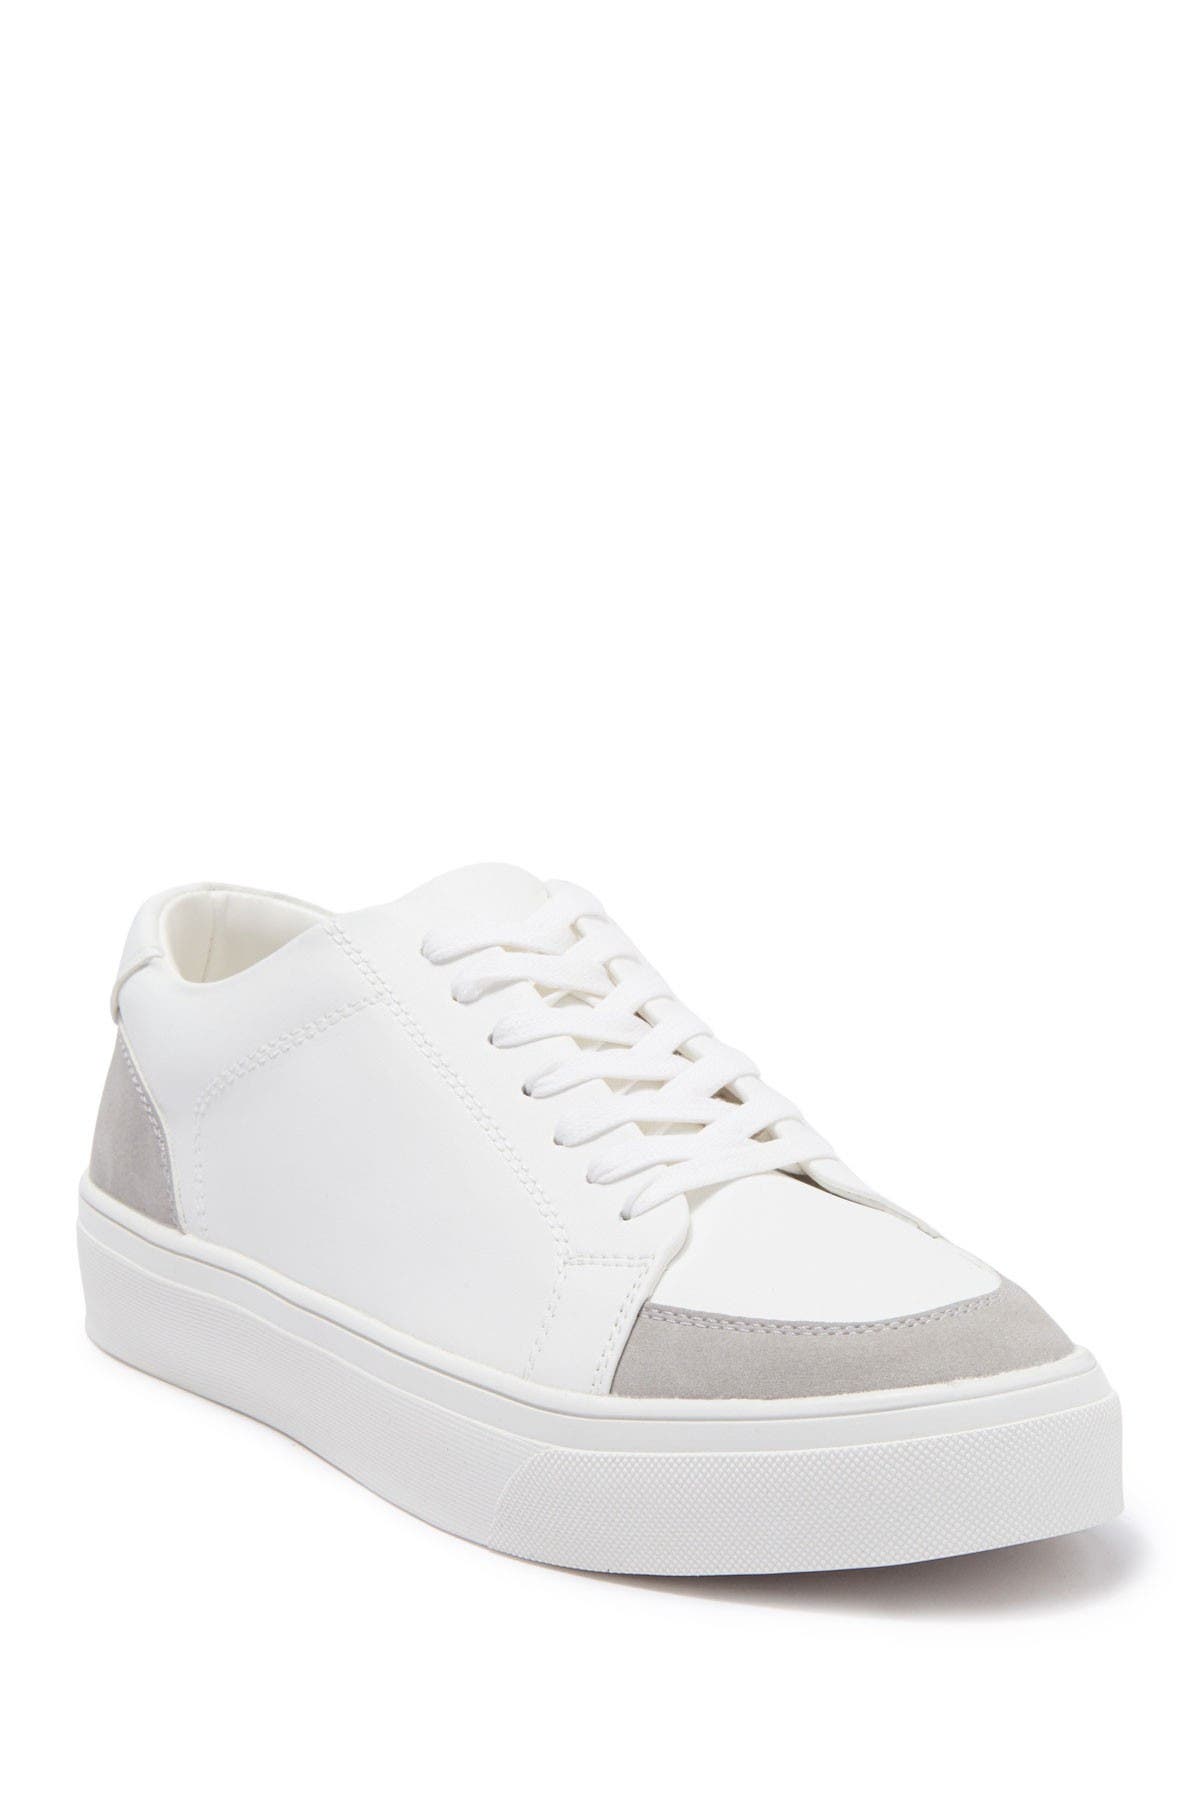 Abound Felix Lace-up Sneaker In White